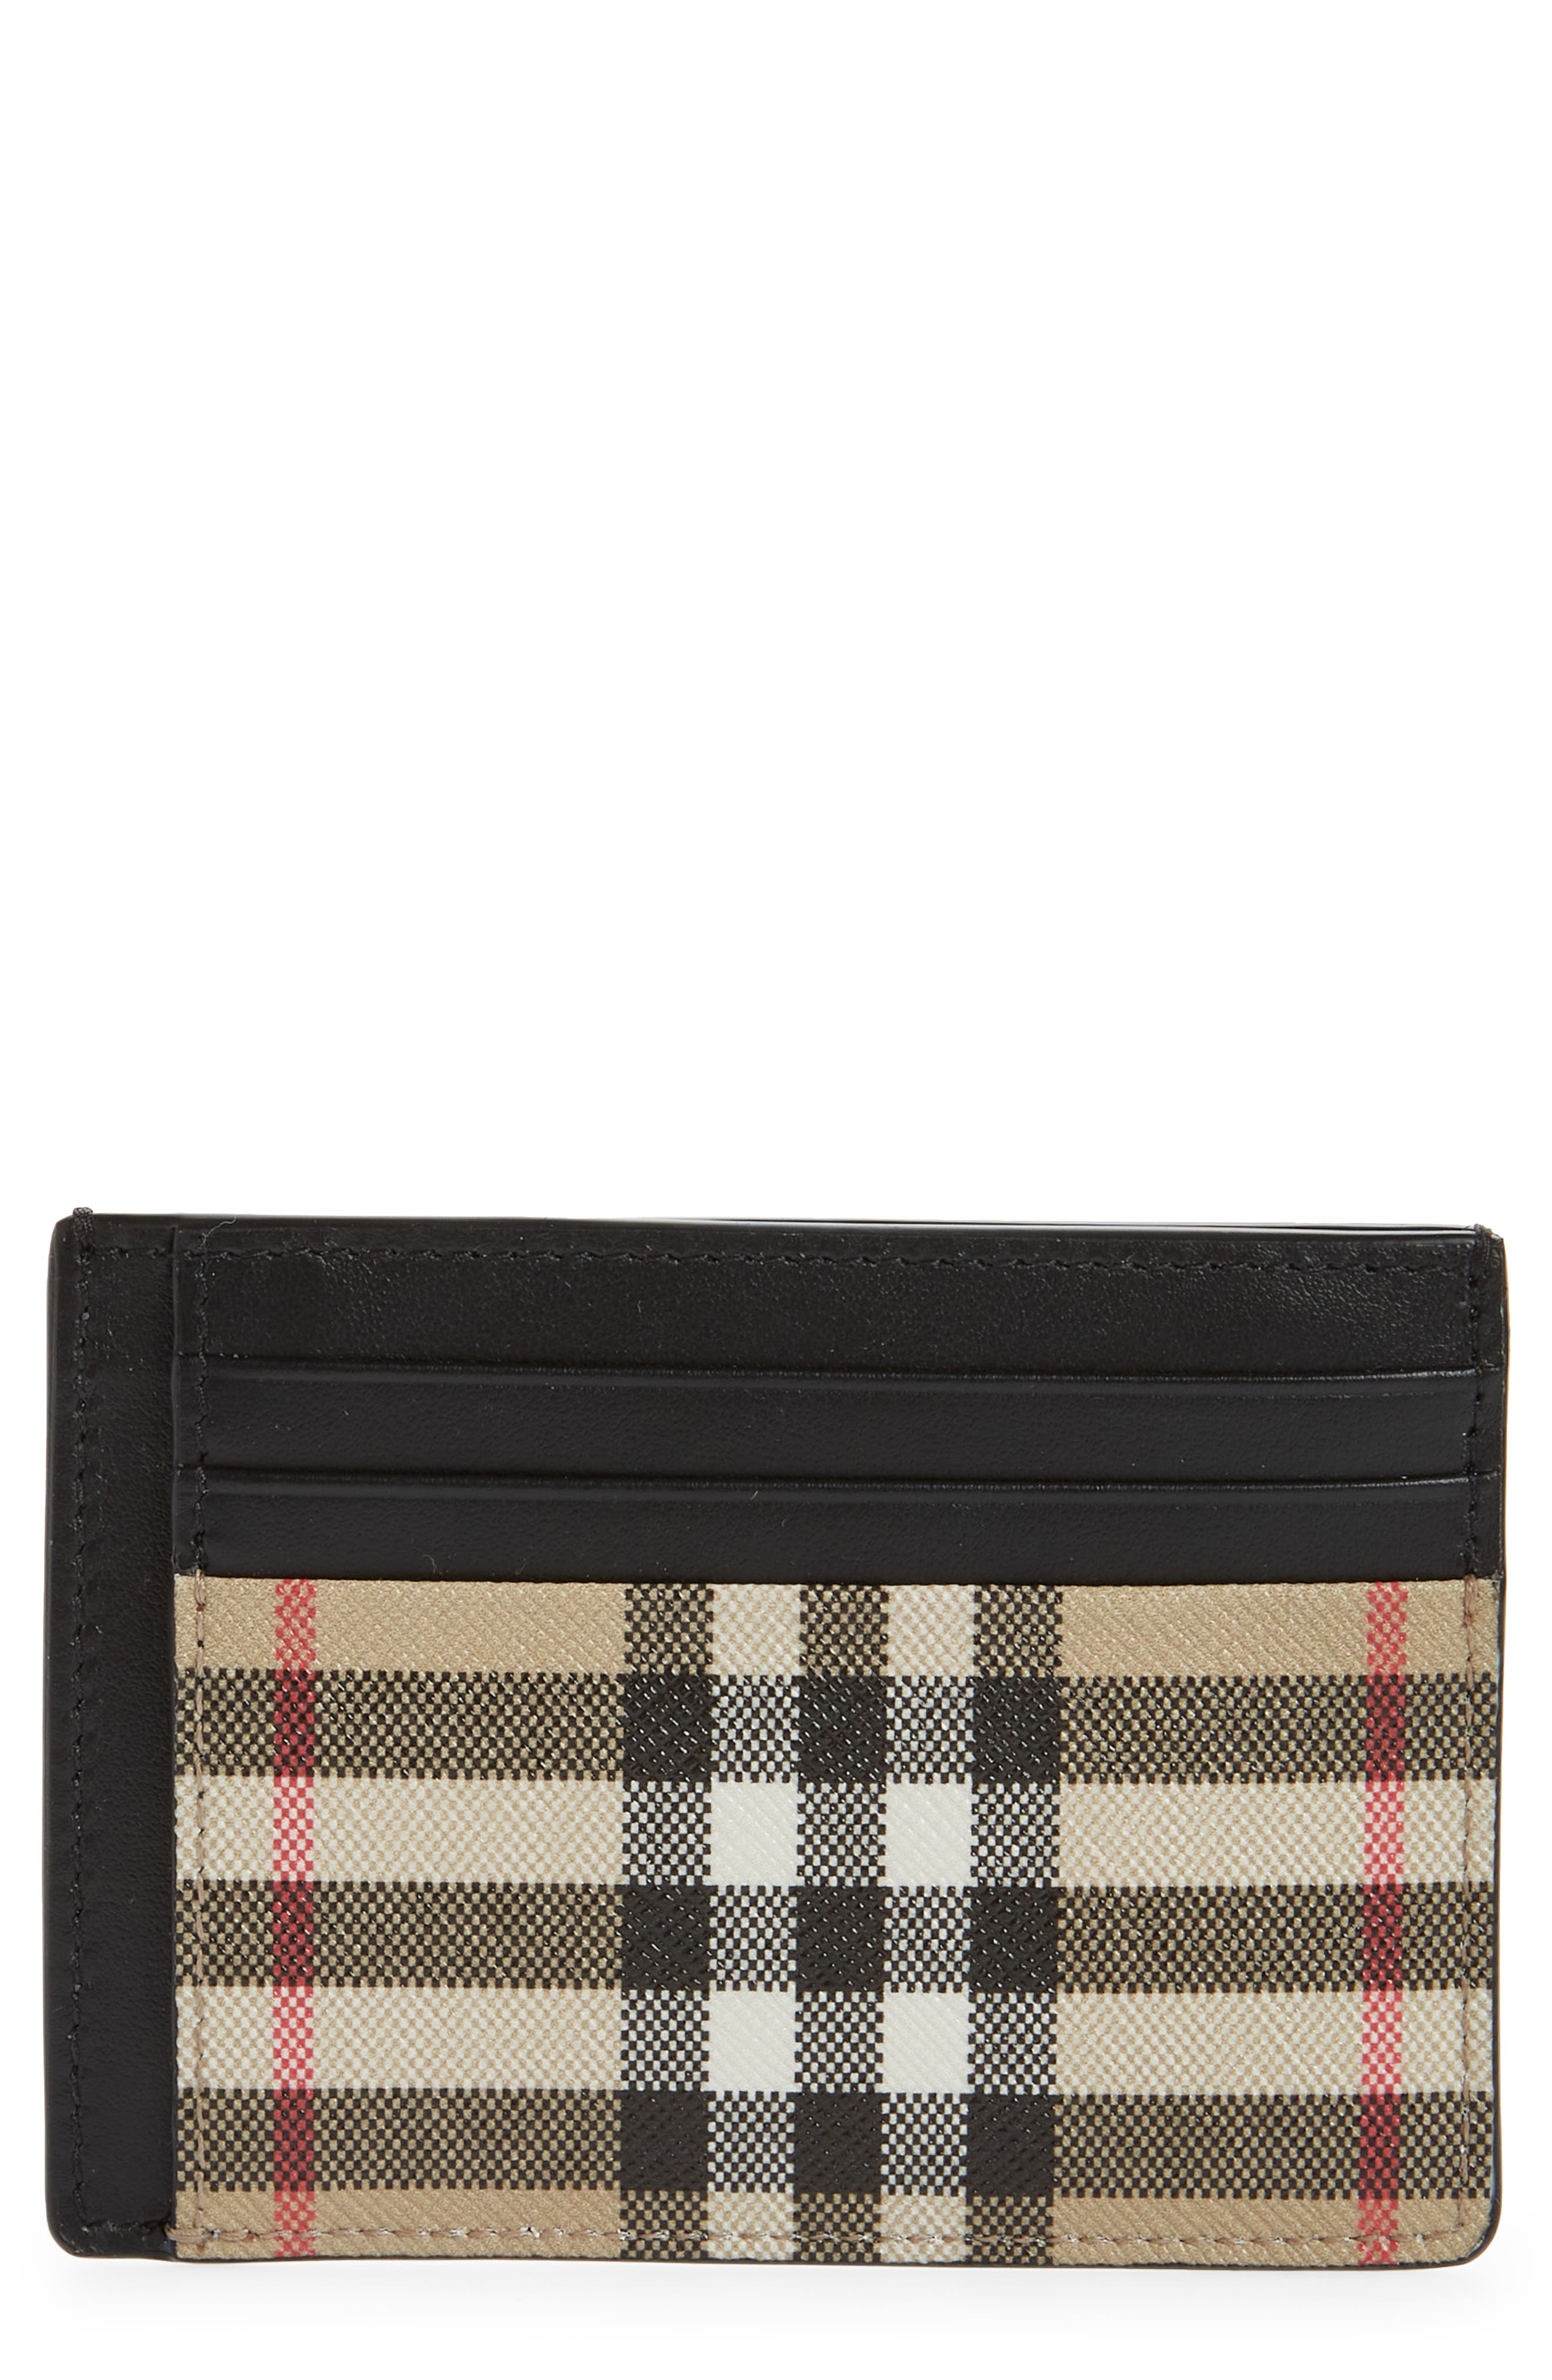 Burberry Chase Check E-Canvas & Leather Card Case with Money Clip in Archive Beige at Nordstrom